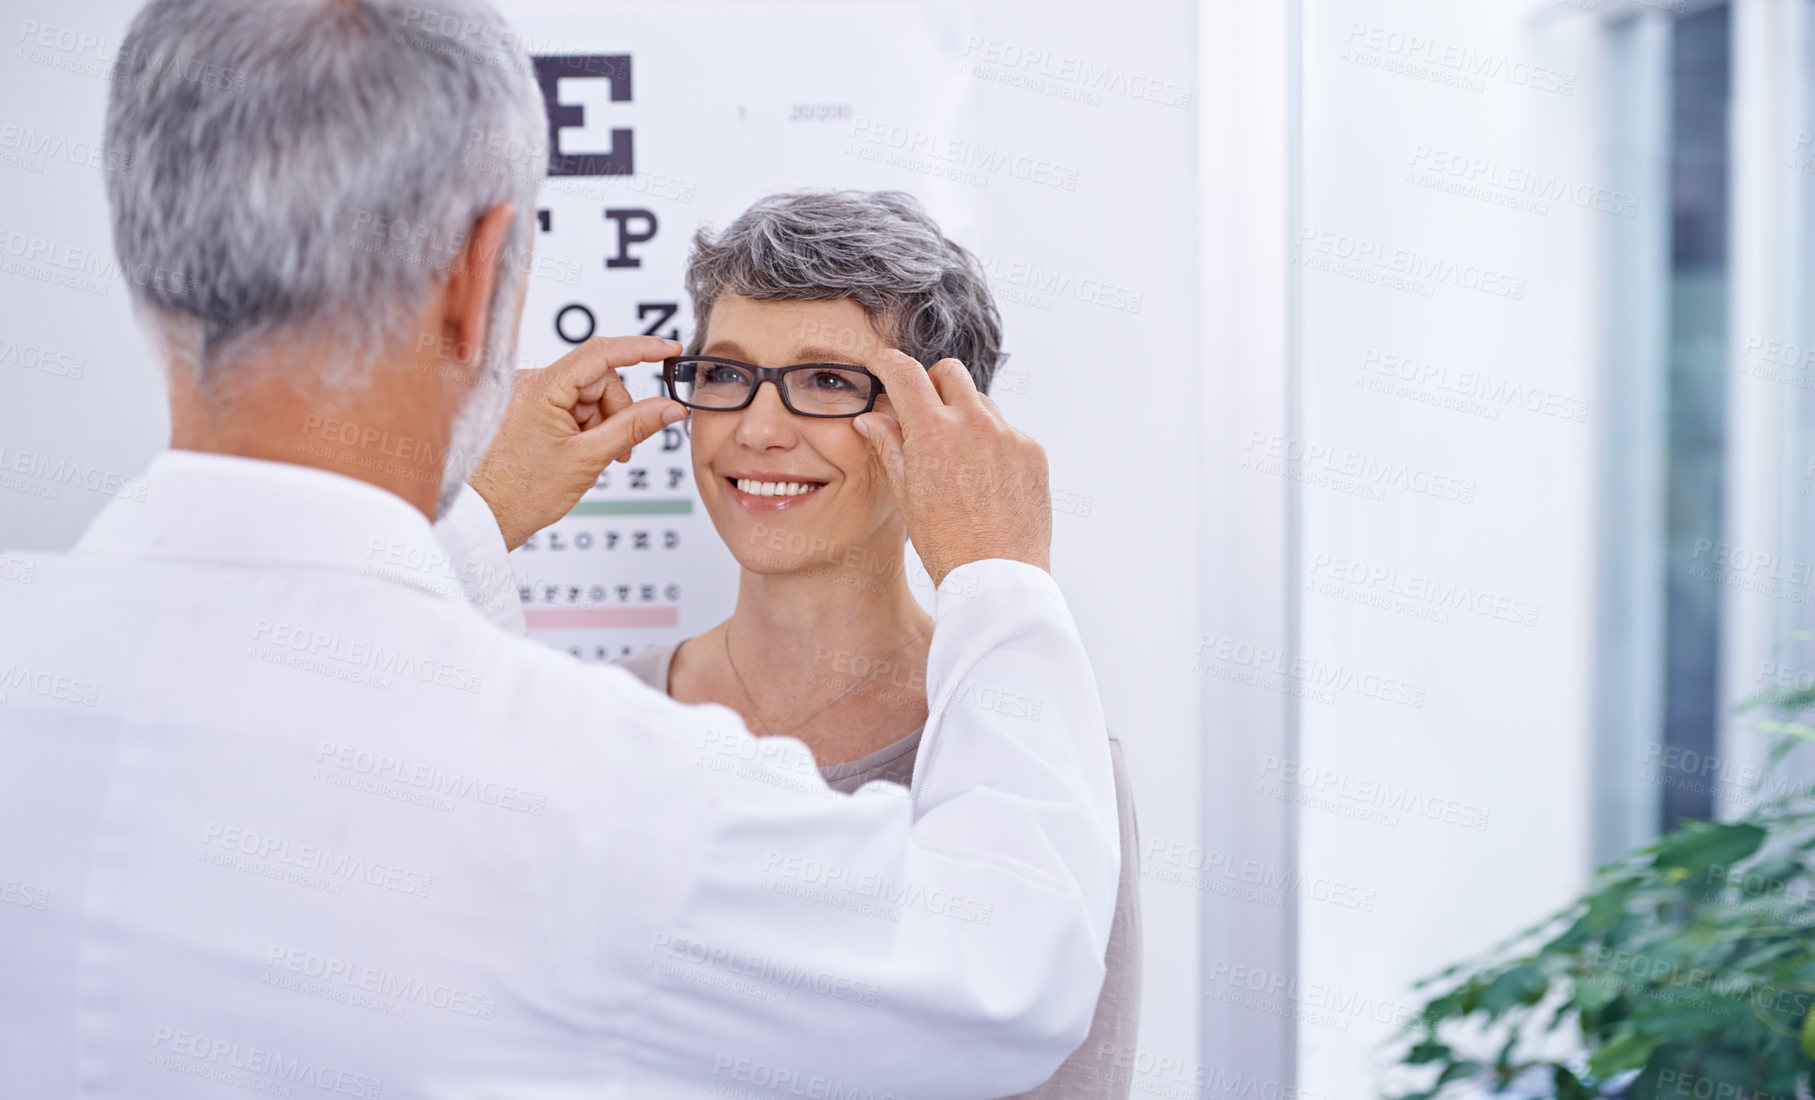 Buy stock photo Shot of an optometrist putting a pair of glasses on a patient